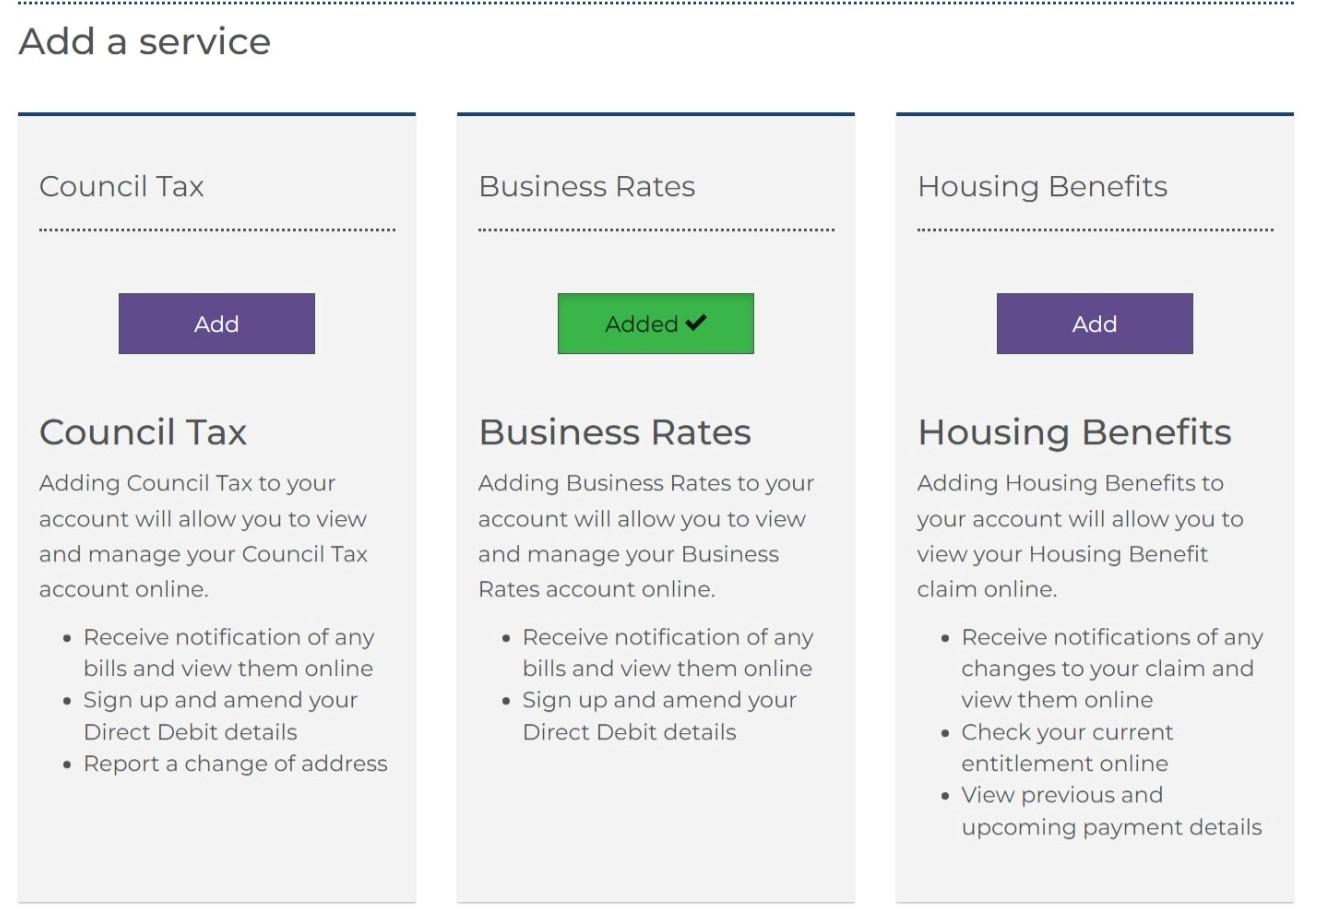 Add a service screen with Business Rates option selected